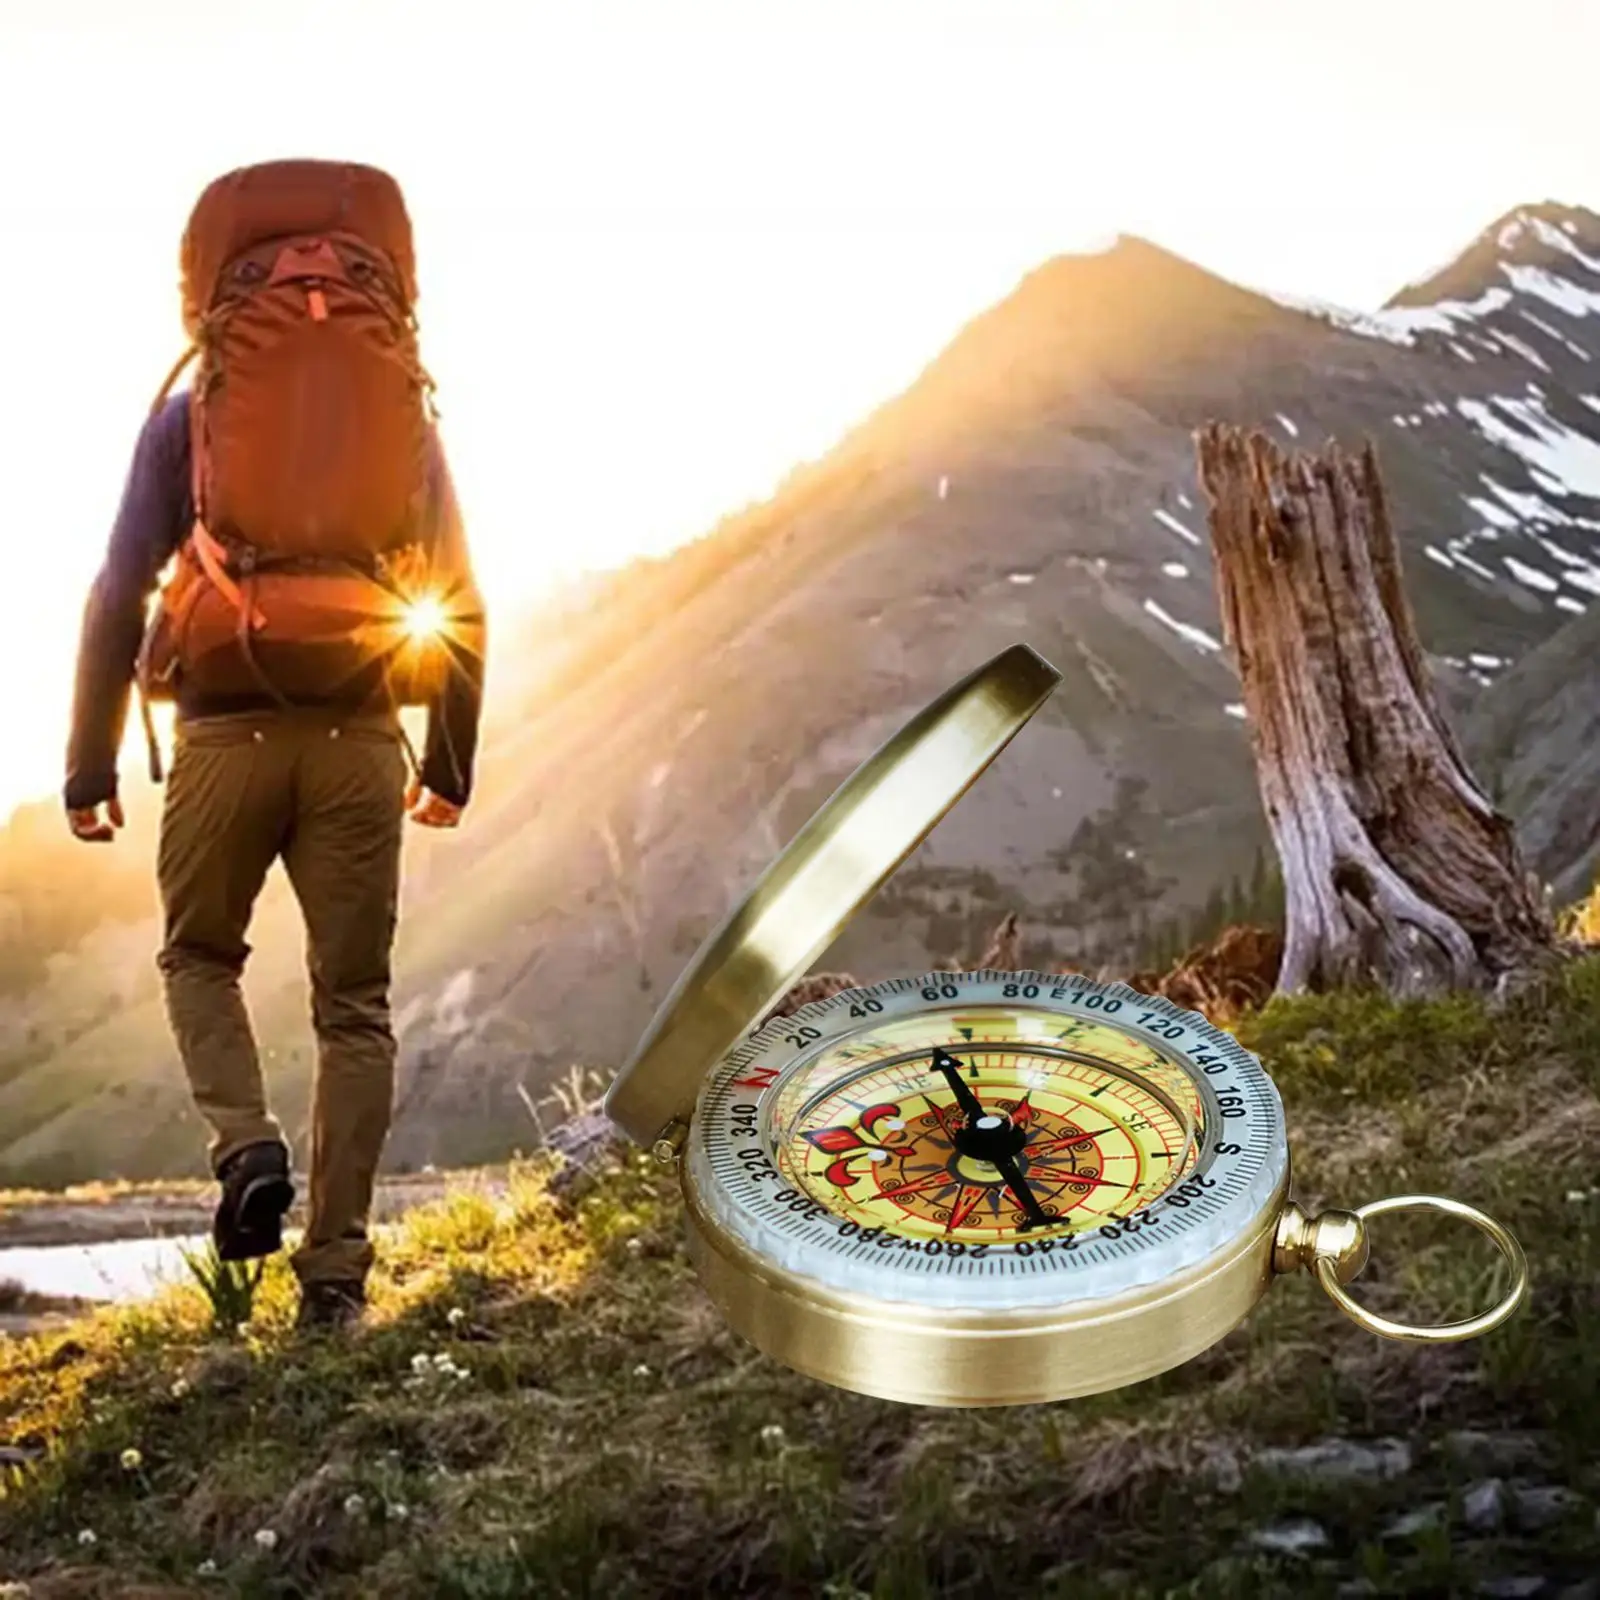 Camping Survival Compass Pocket Compass for Outdoor Activities Camping